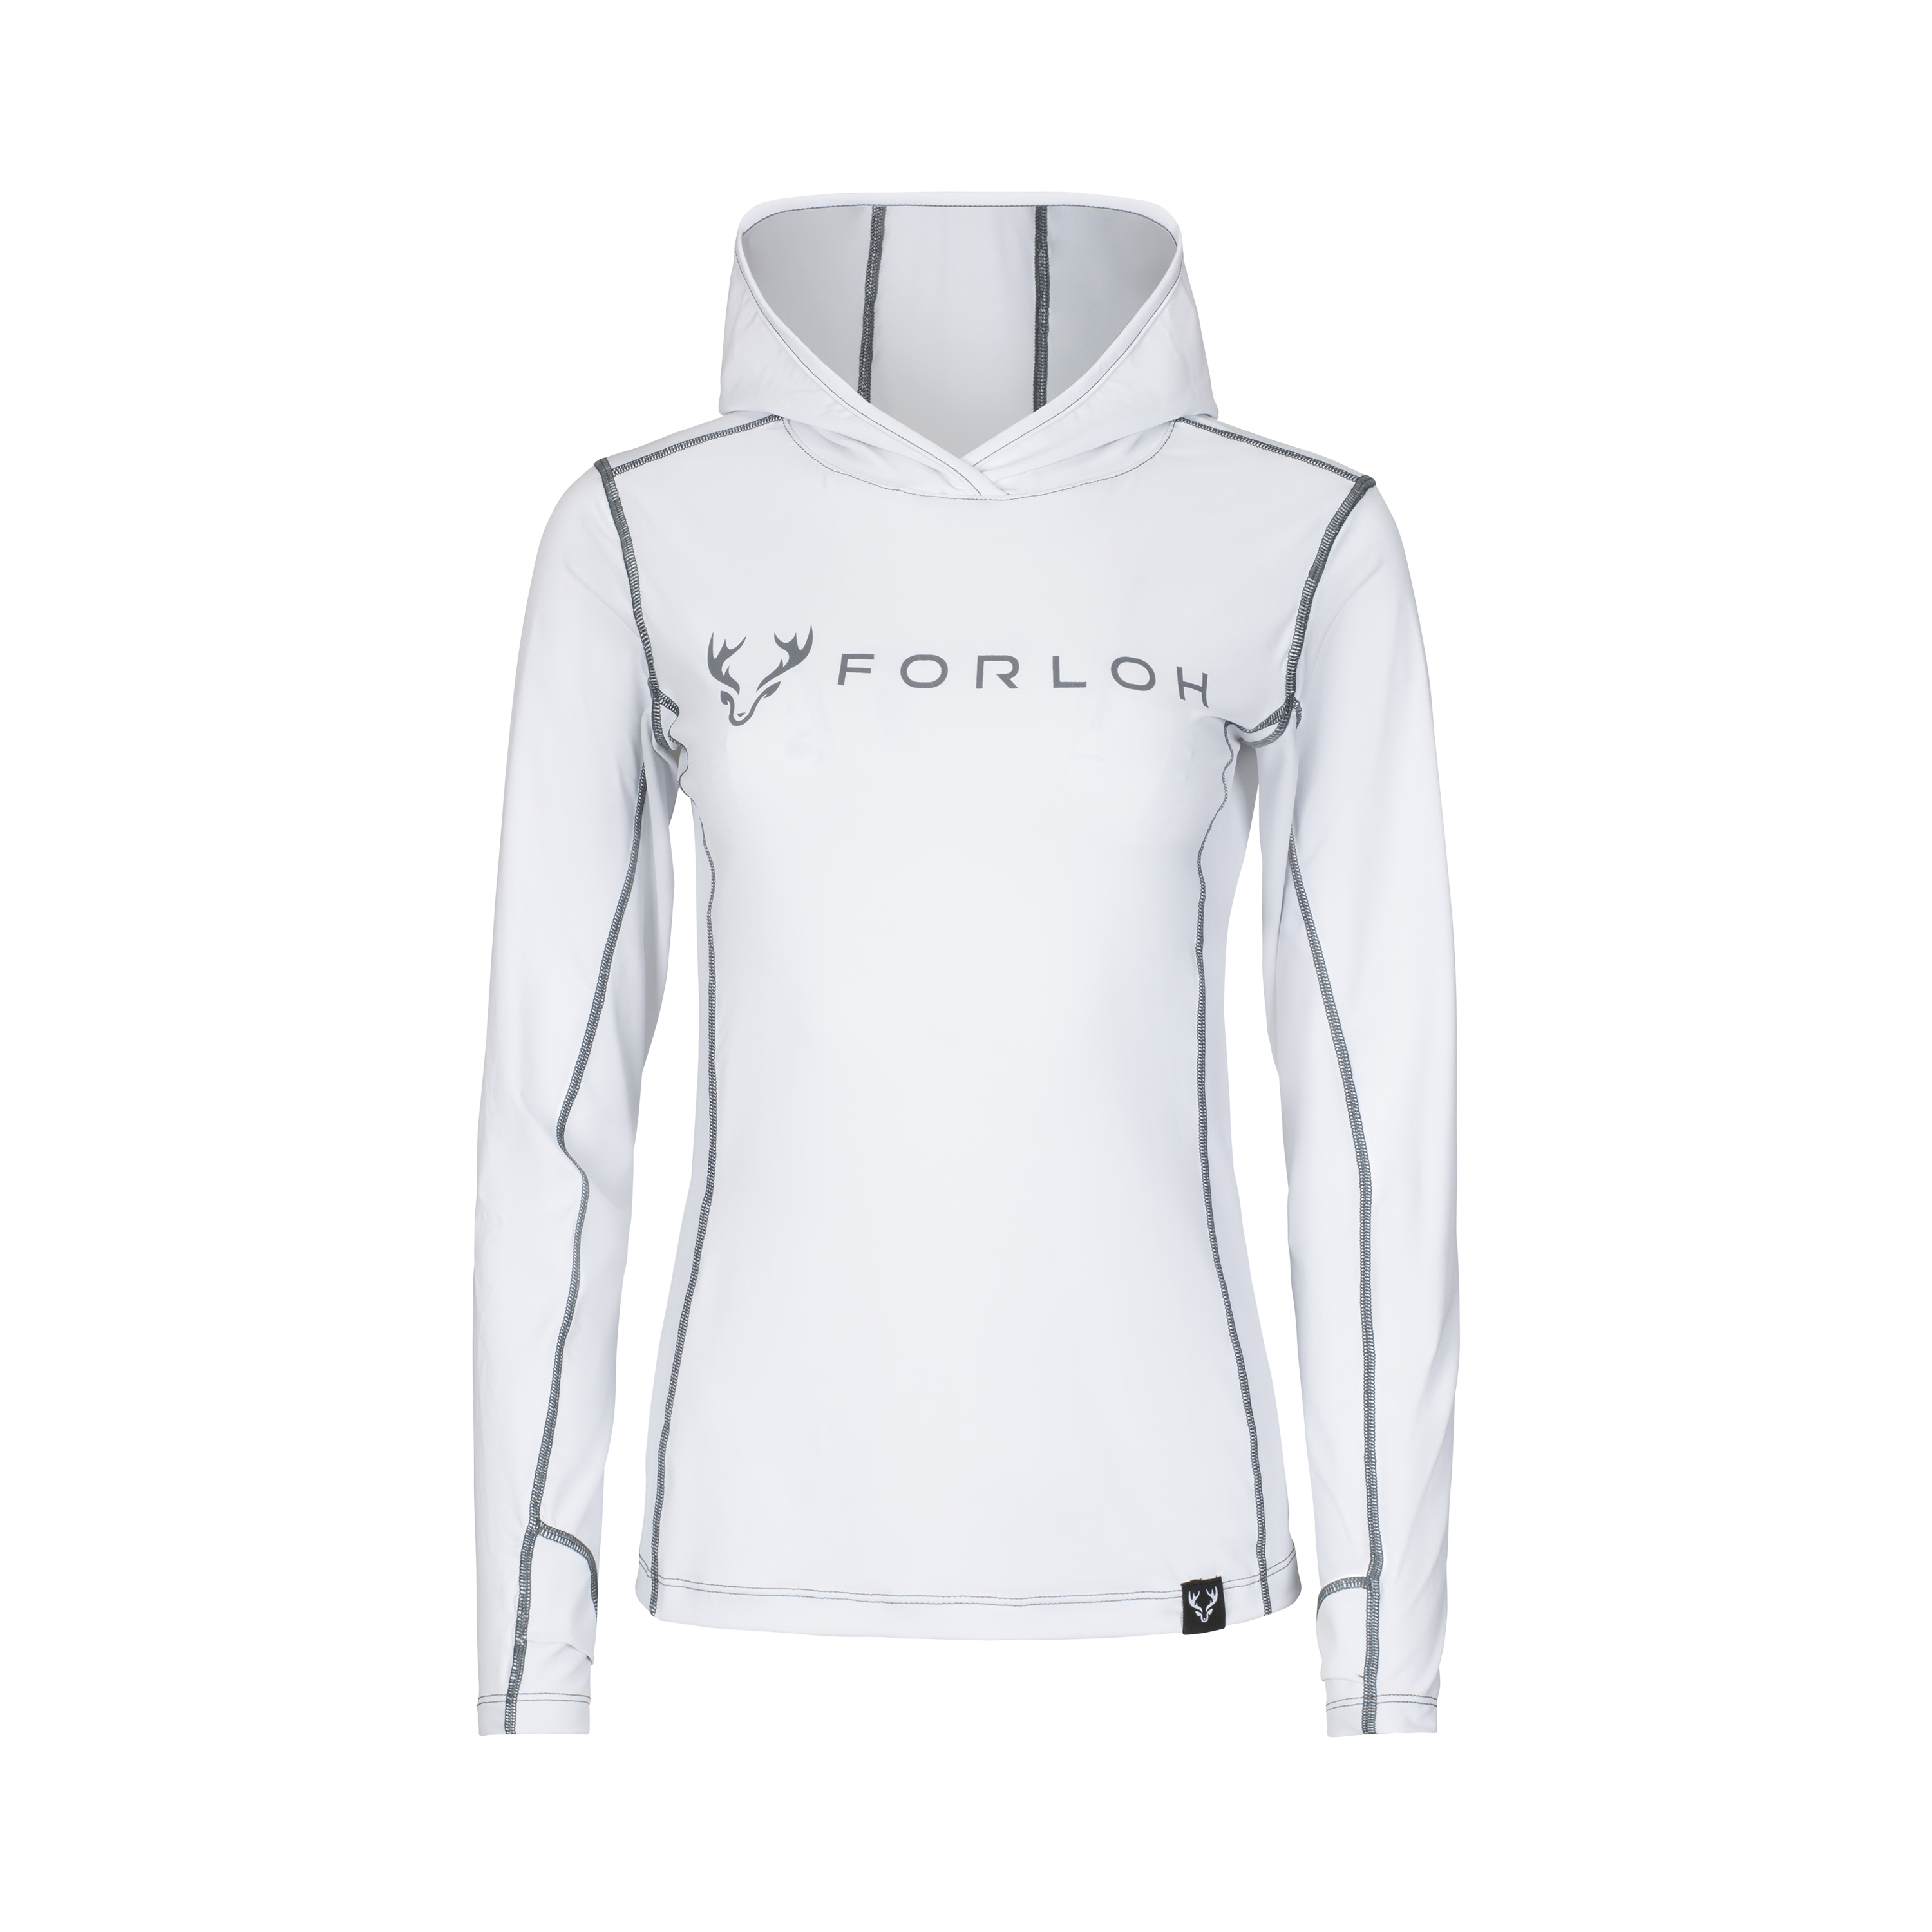 Women's Insect Shield® SolAir Hooded Long Sleeve Shirt - FORLOH